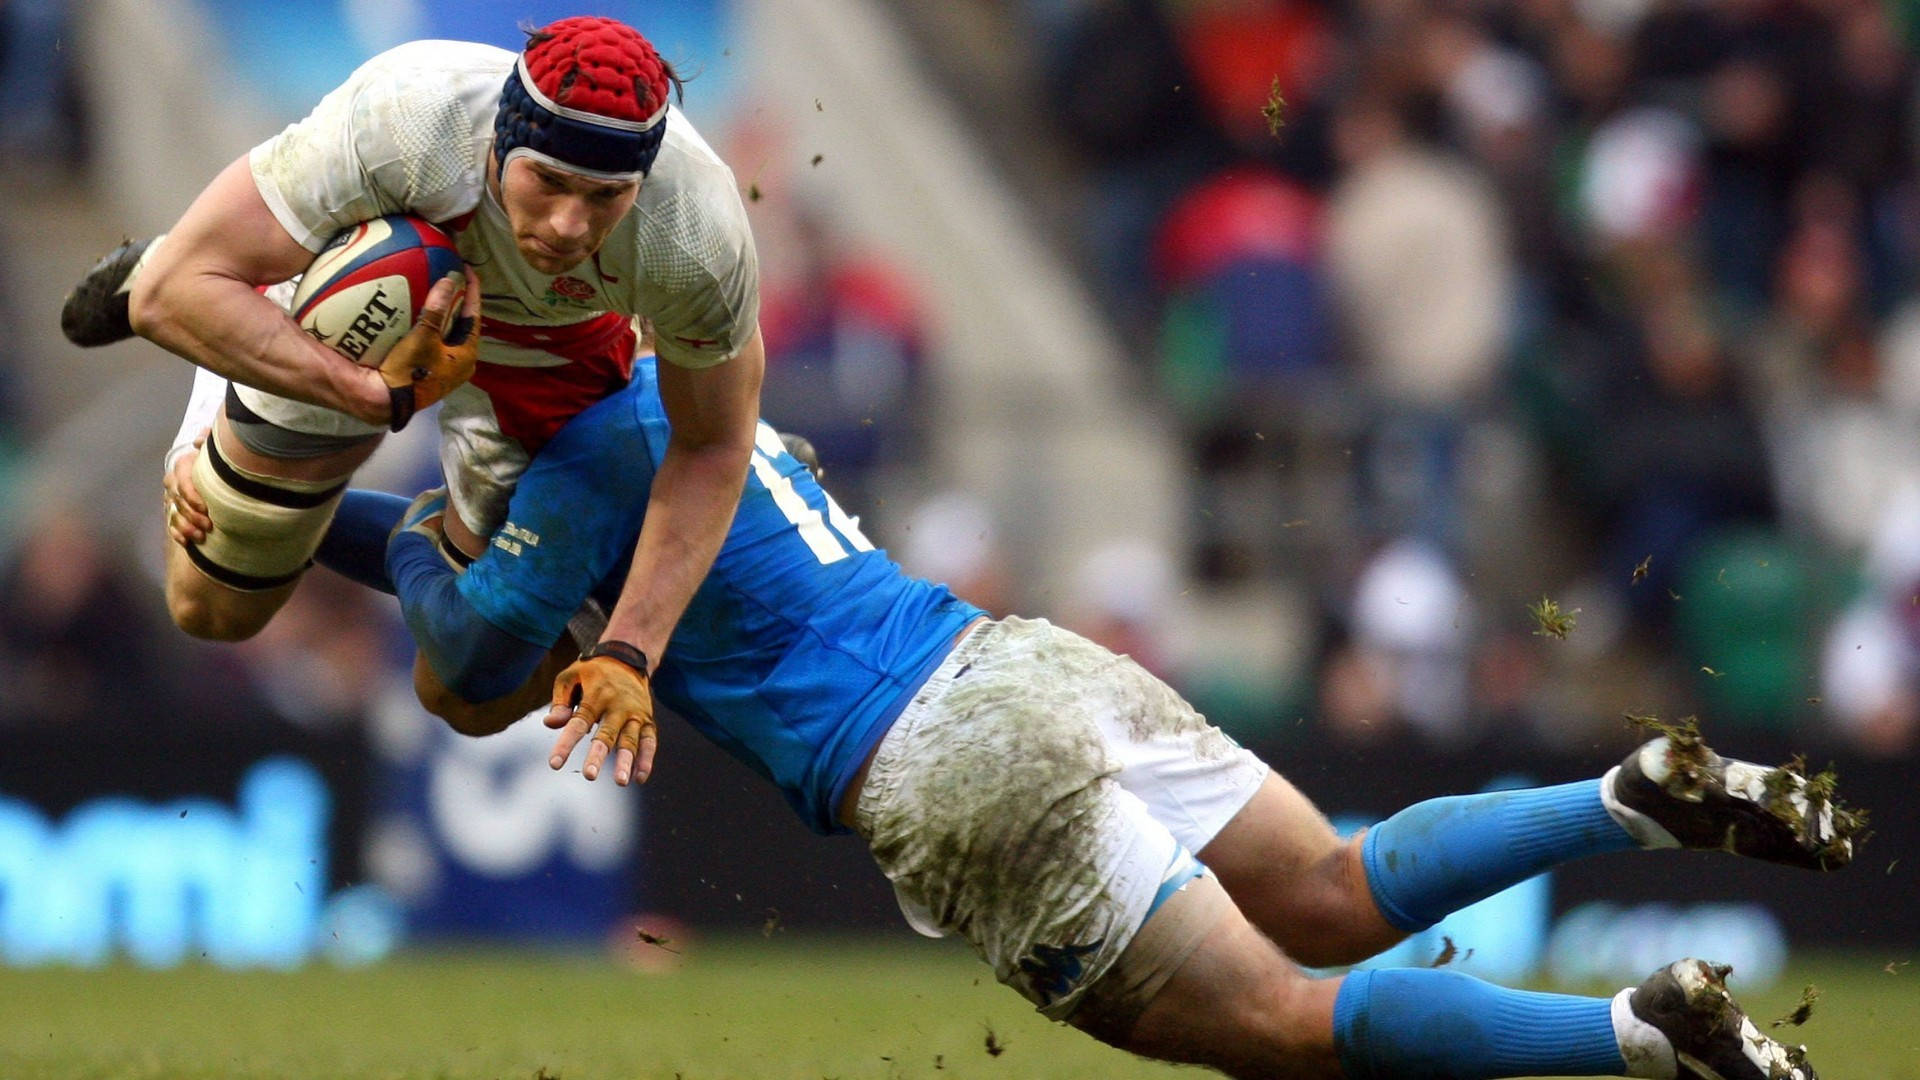 Caption: Intense Rugby Action - The England Rugby Tackle